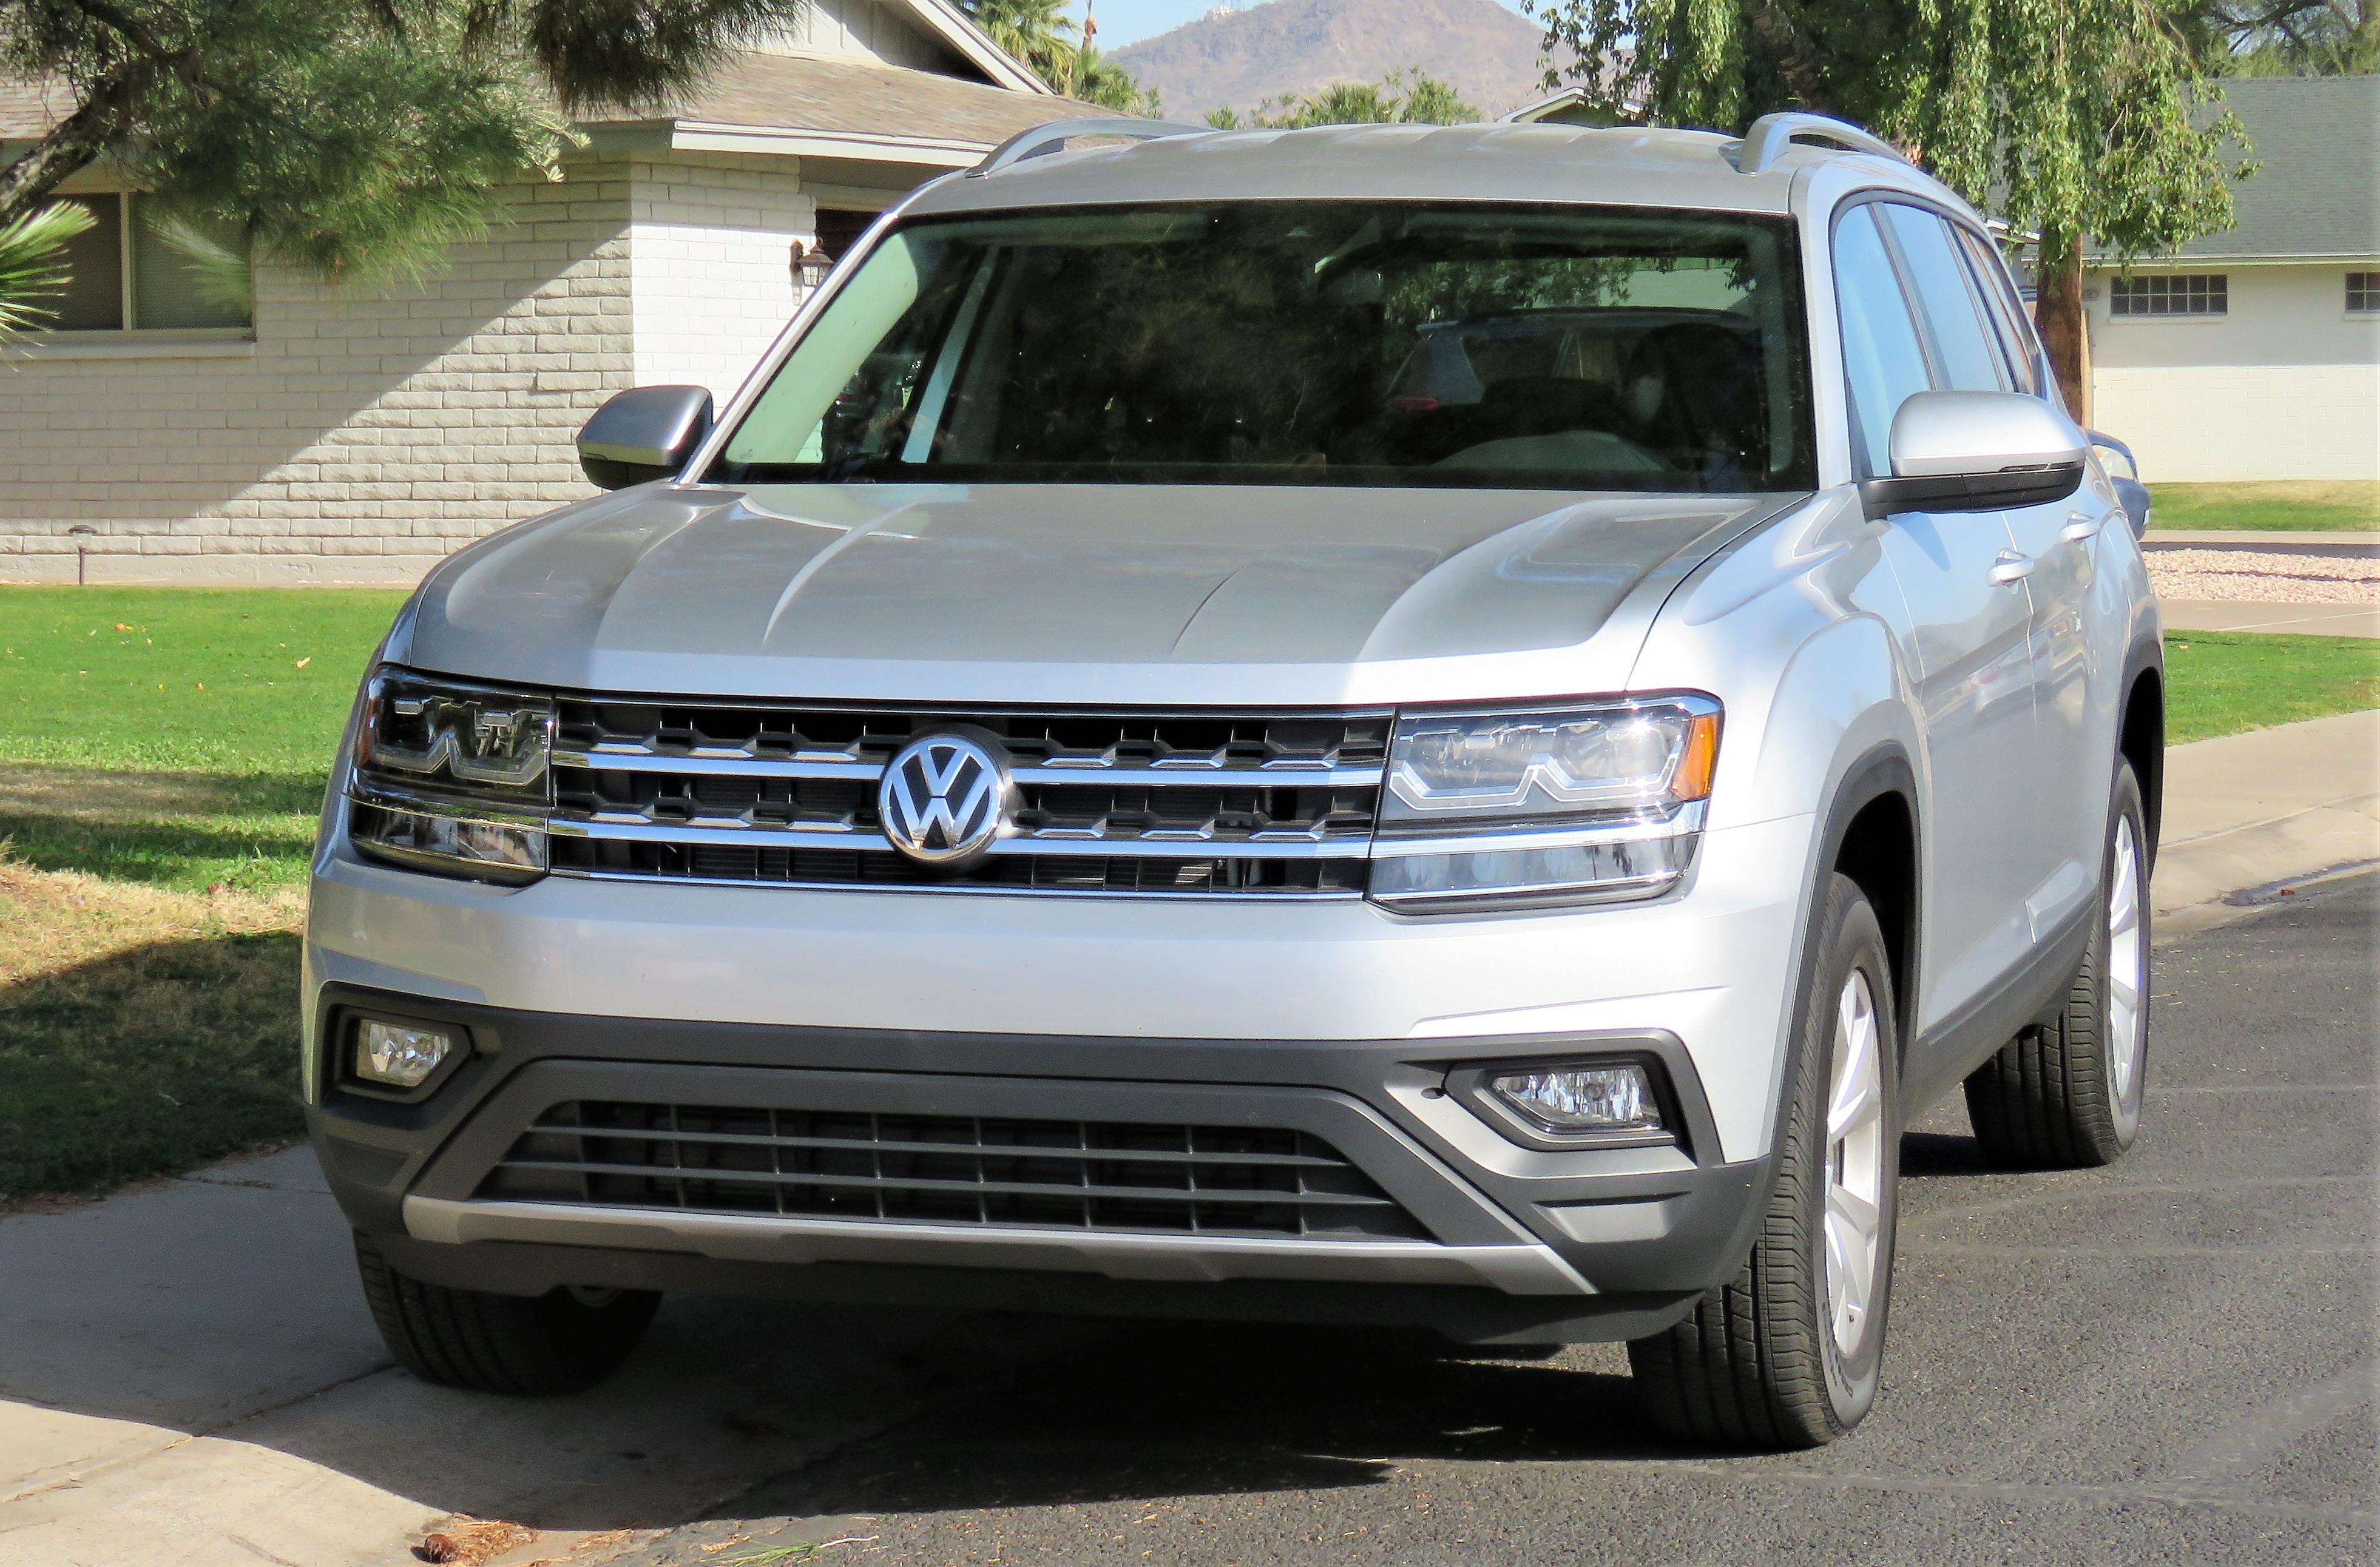 VW, Brawny Atlas carries VW into larger scale but with a soft touch, ClassicCars.com Journal